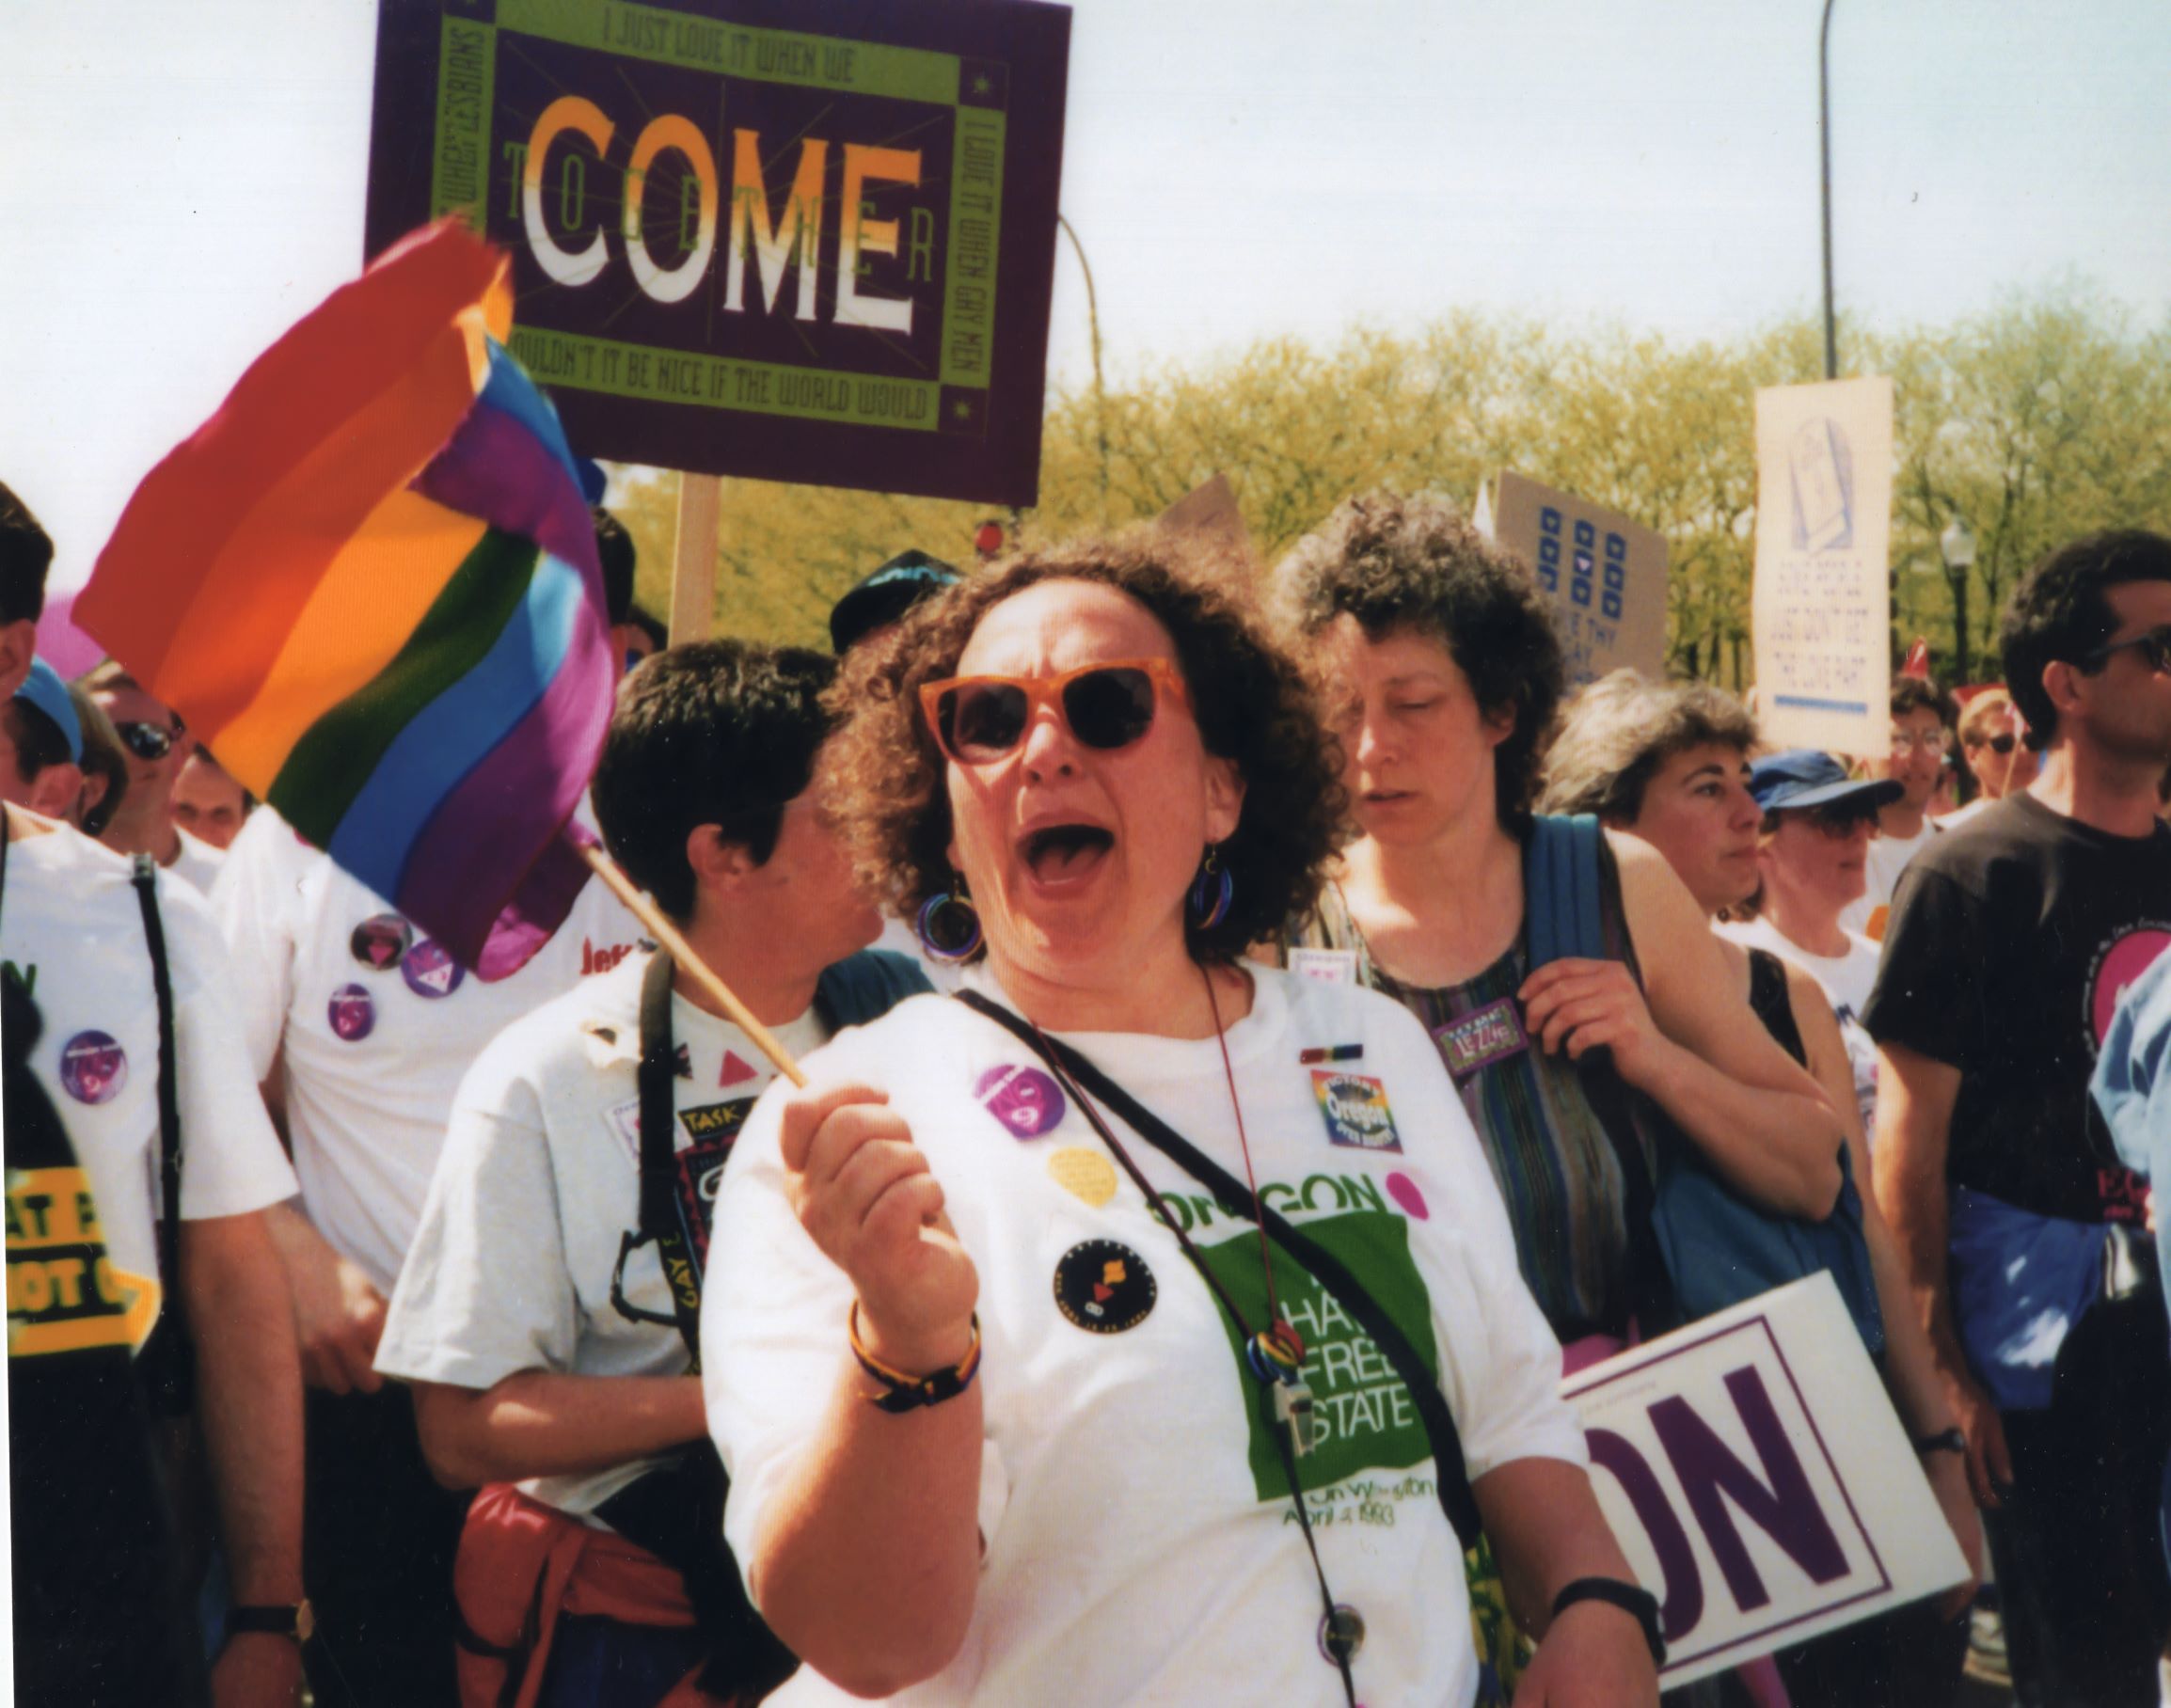 Sally Sheklow marches waving a Pride flag and wearing a "No Hate" shirt